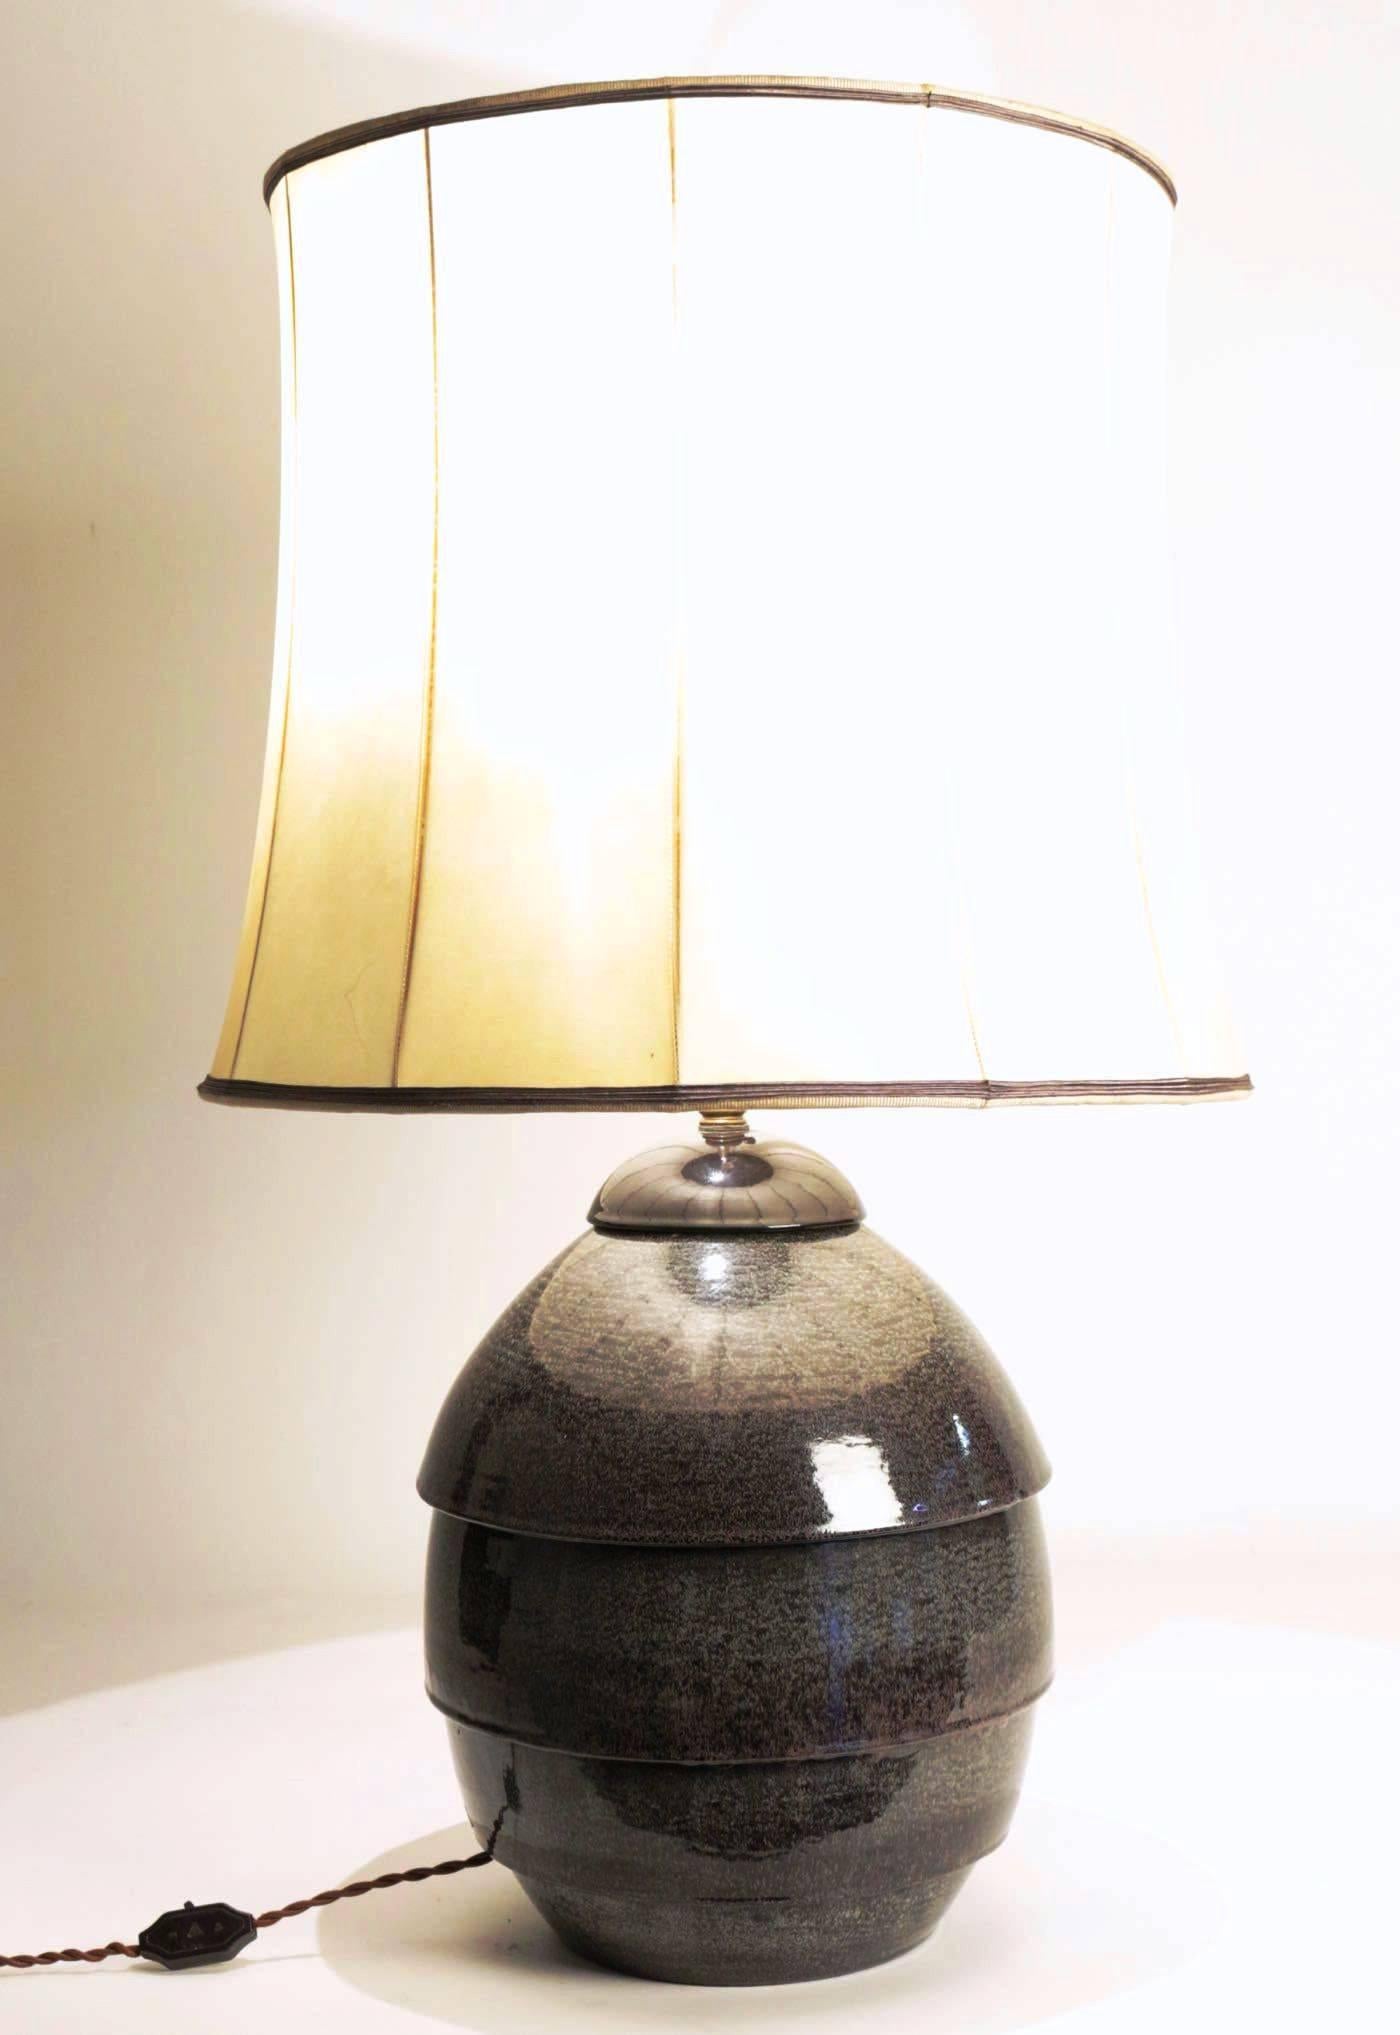 Rare and beautiful grey ceramics lamp by Andre Fau, 1896-1985, France, 1950s (with original shade)
Manufacture de Bordeaux
Fau studied decorative arts at the École des Beaux-Arts and under Gabriel Ferrier.

Since 1919 dedicated himself to